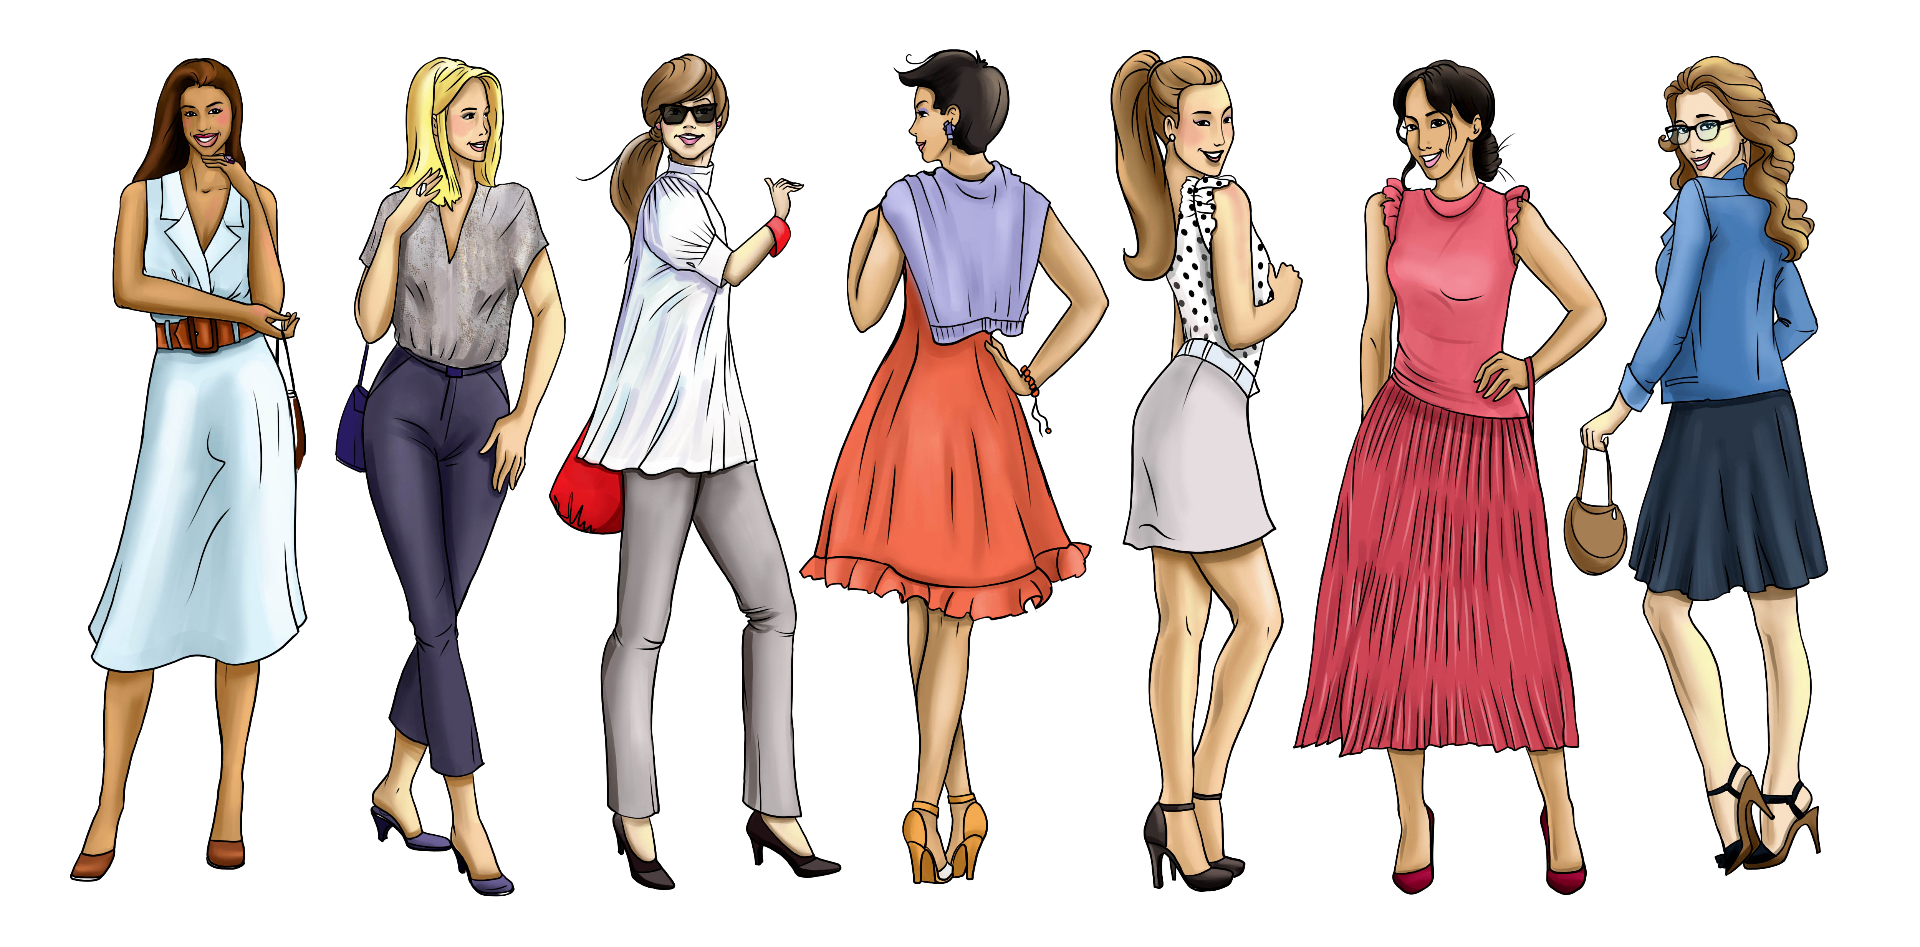 Drawing of seven well-dressed women standing together